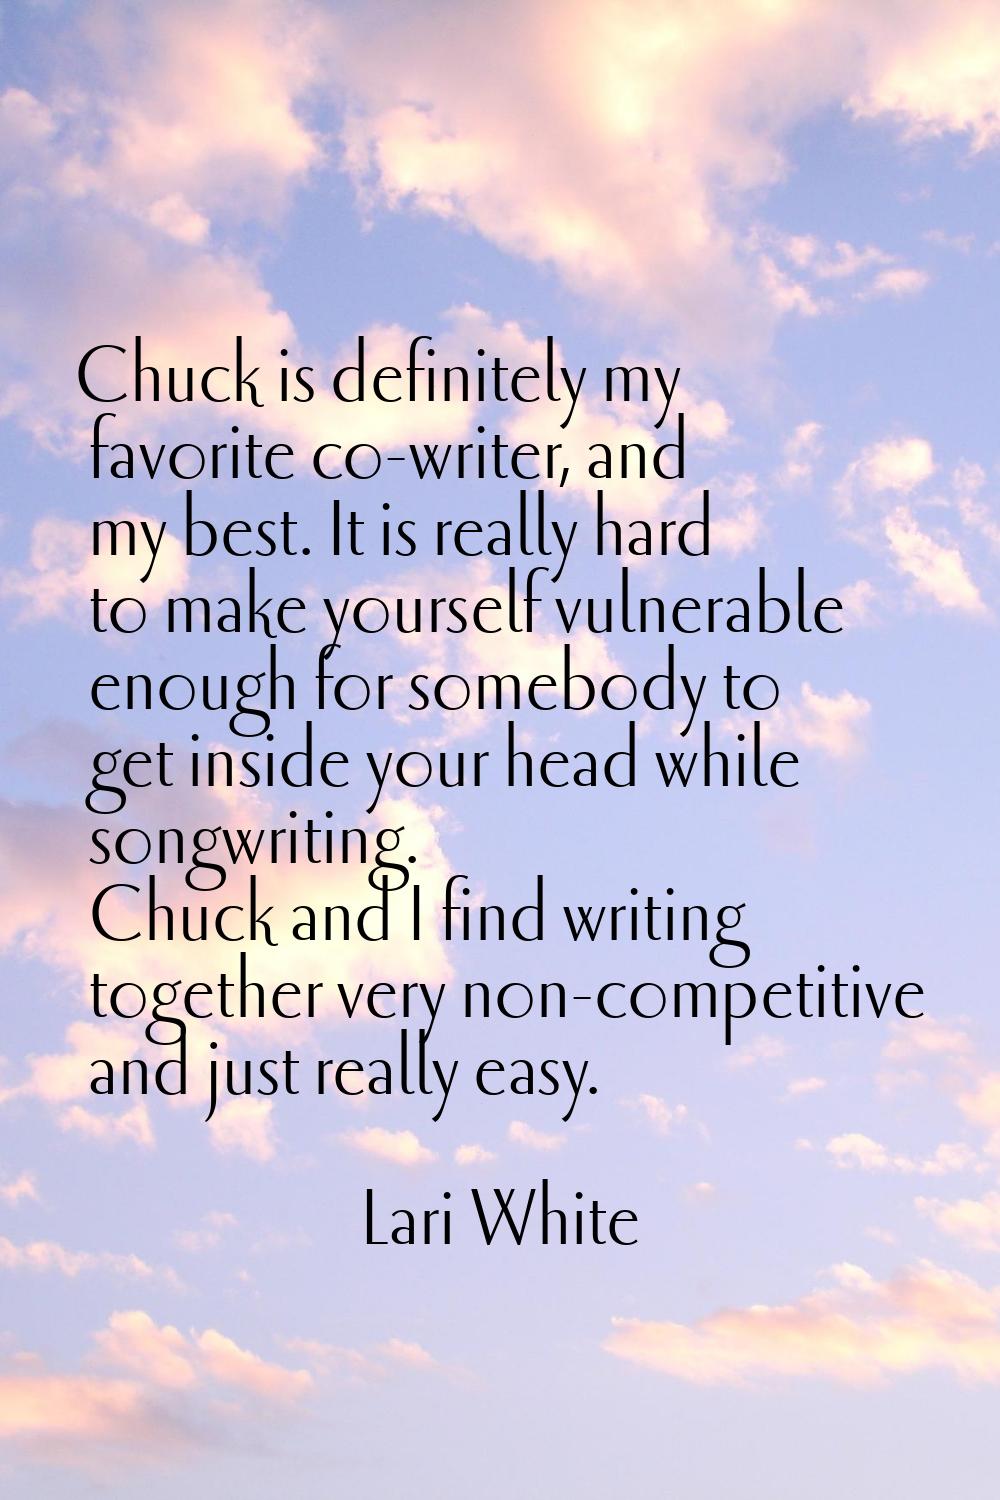 Chuck is definitely my favorite co-writer, and my best. It is really hard to make yourself vulnerab